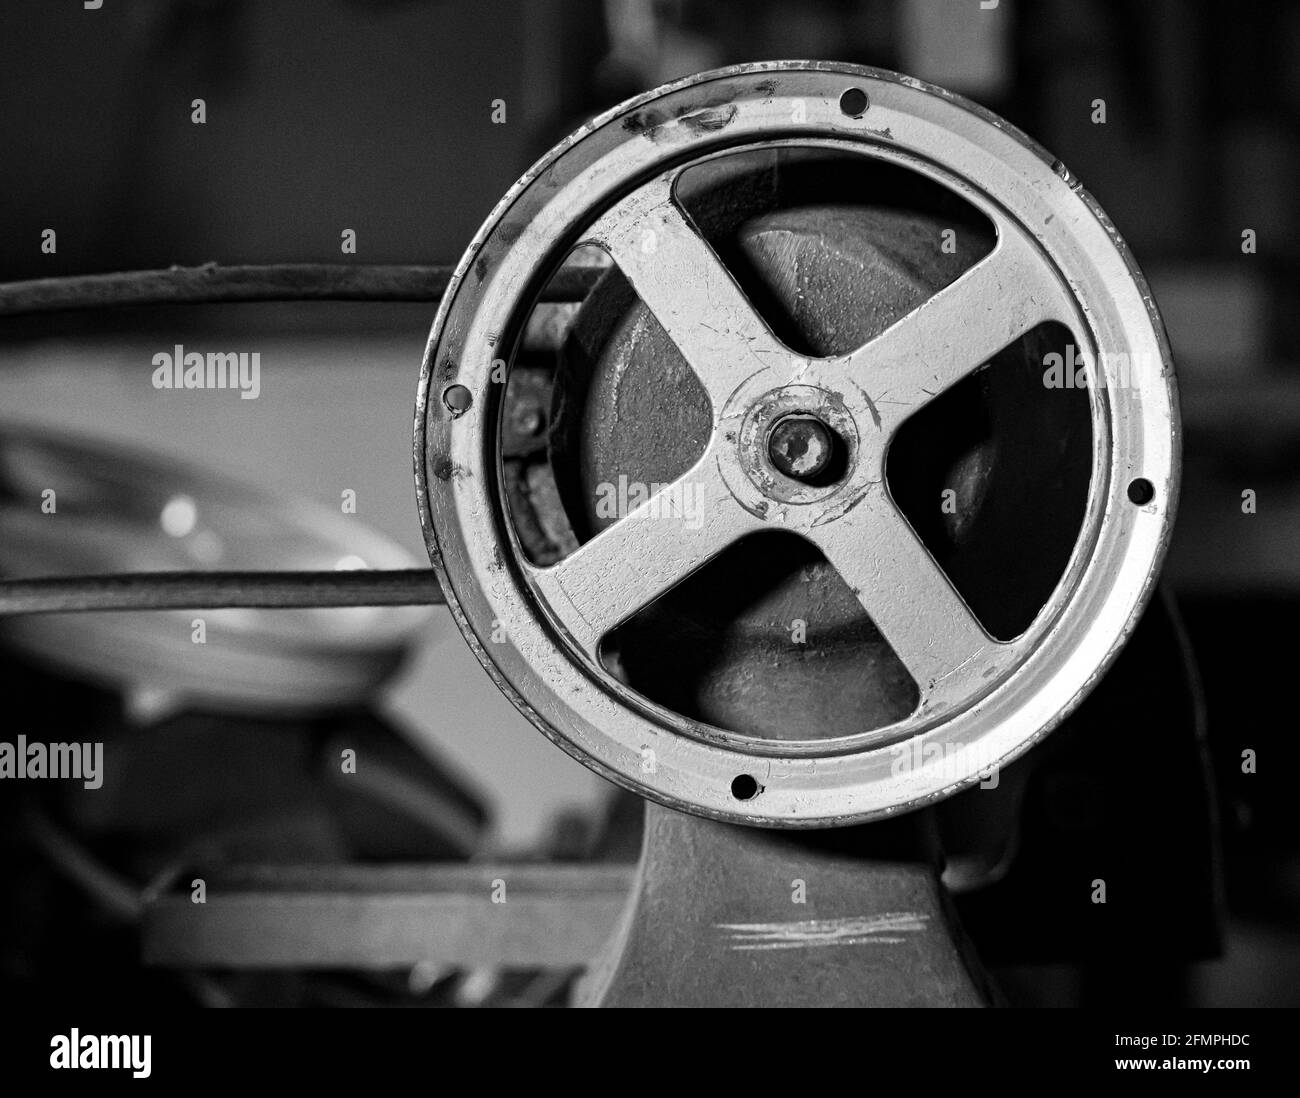 A pulley from an old woodworking lathe machine in a house basement taken in black and white Stock Photo